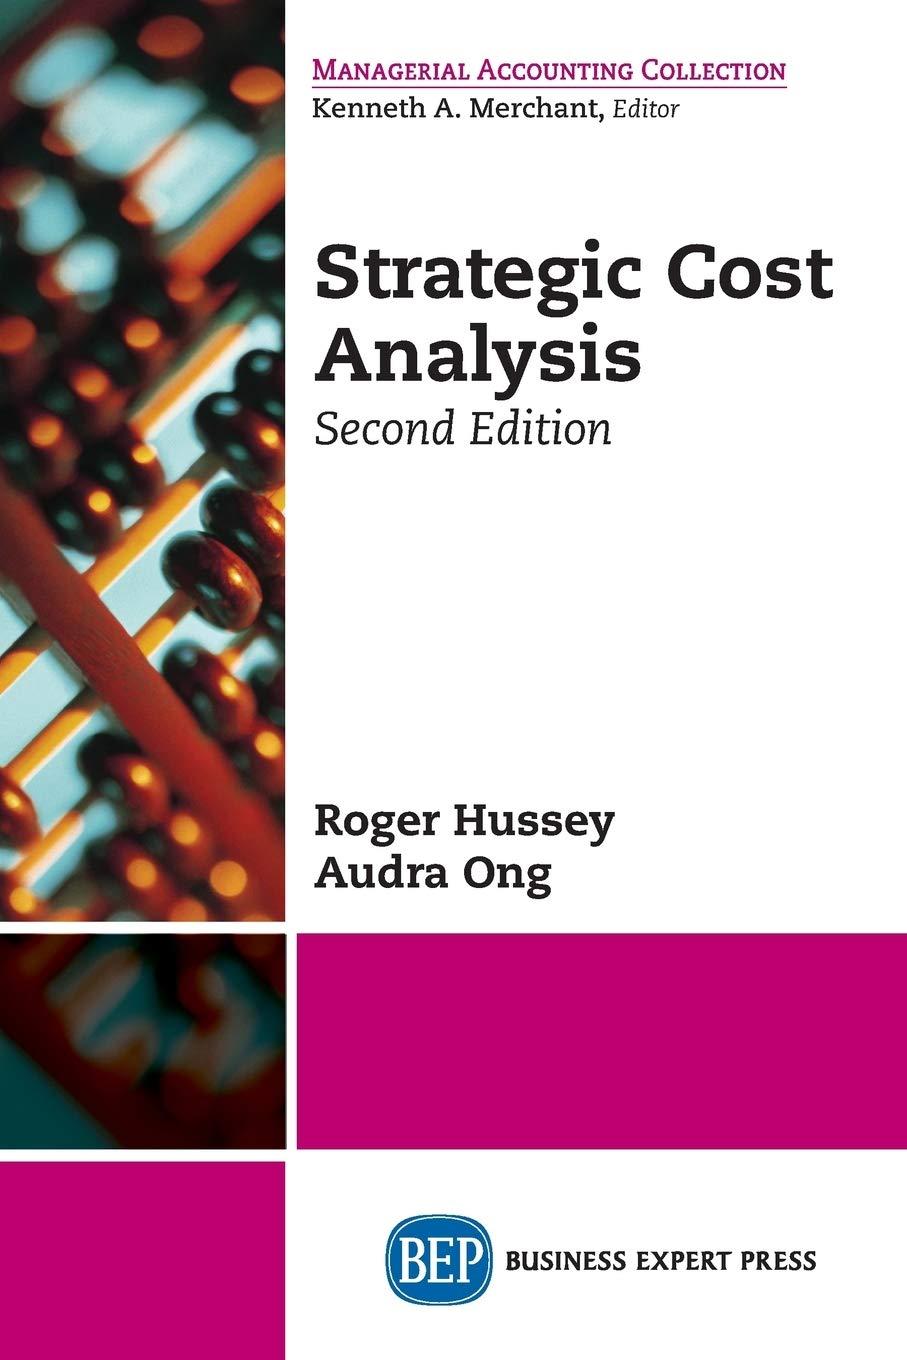 strategic cost analysis 2nd edition roger hussey, audra ong 1947098950, 978-1947098954